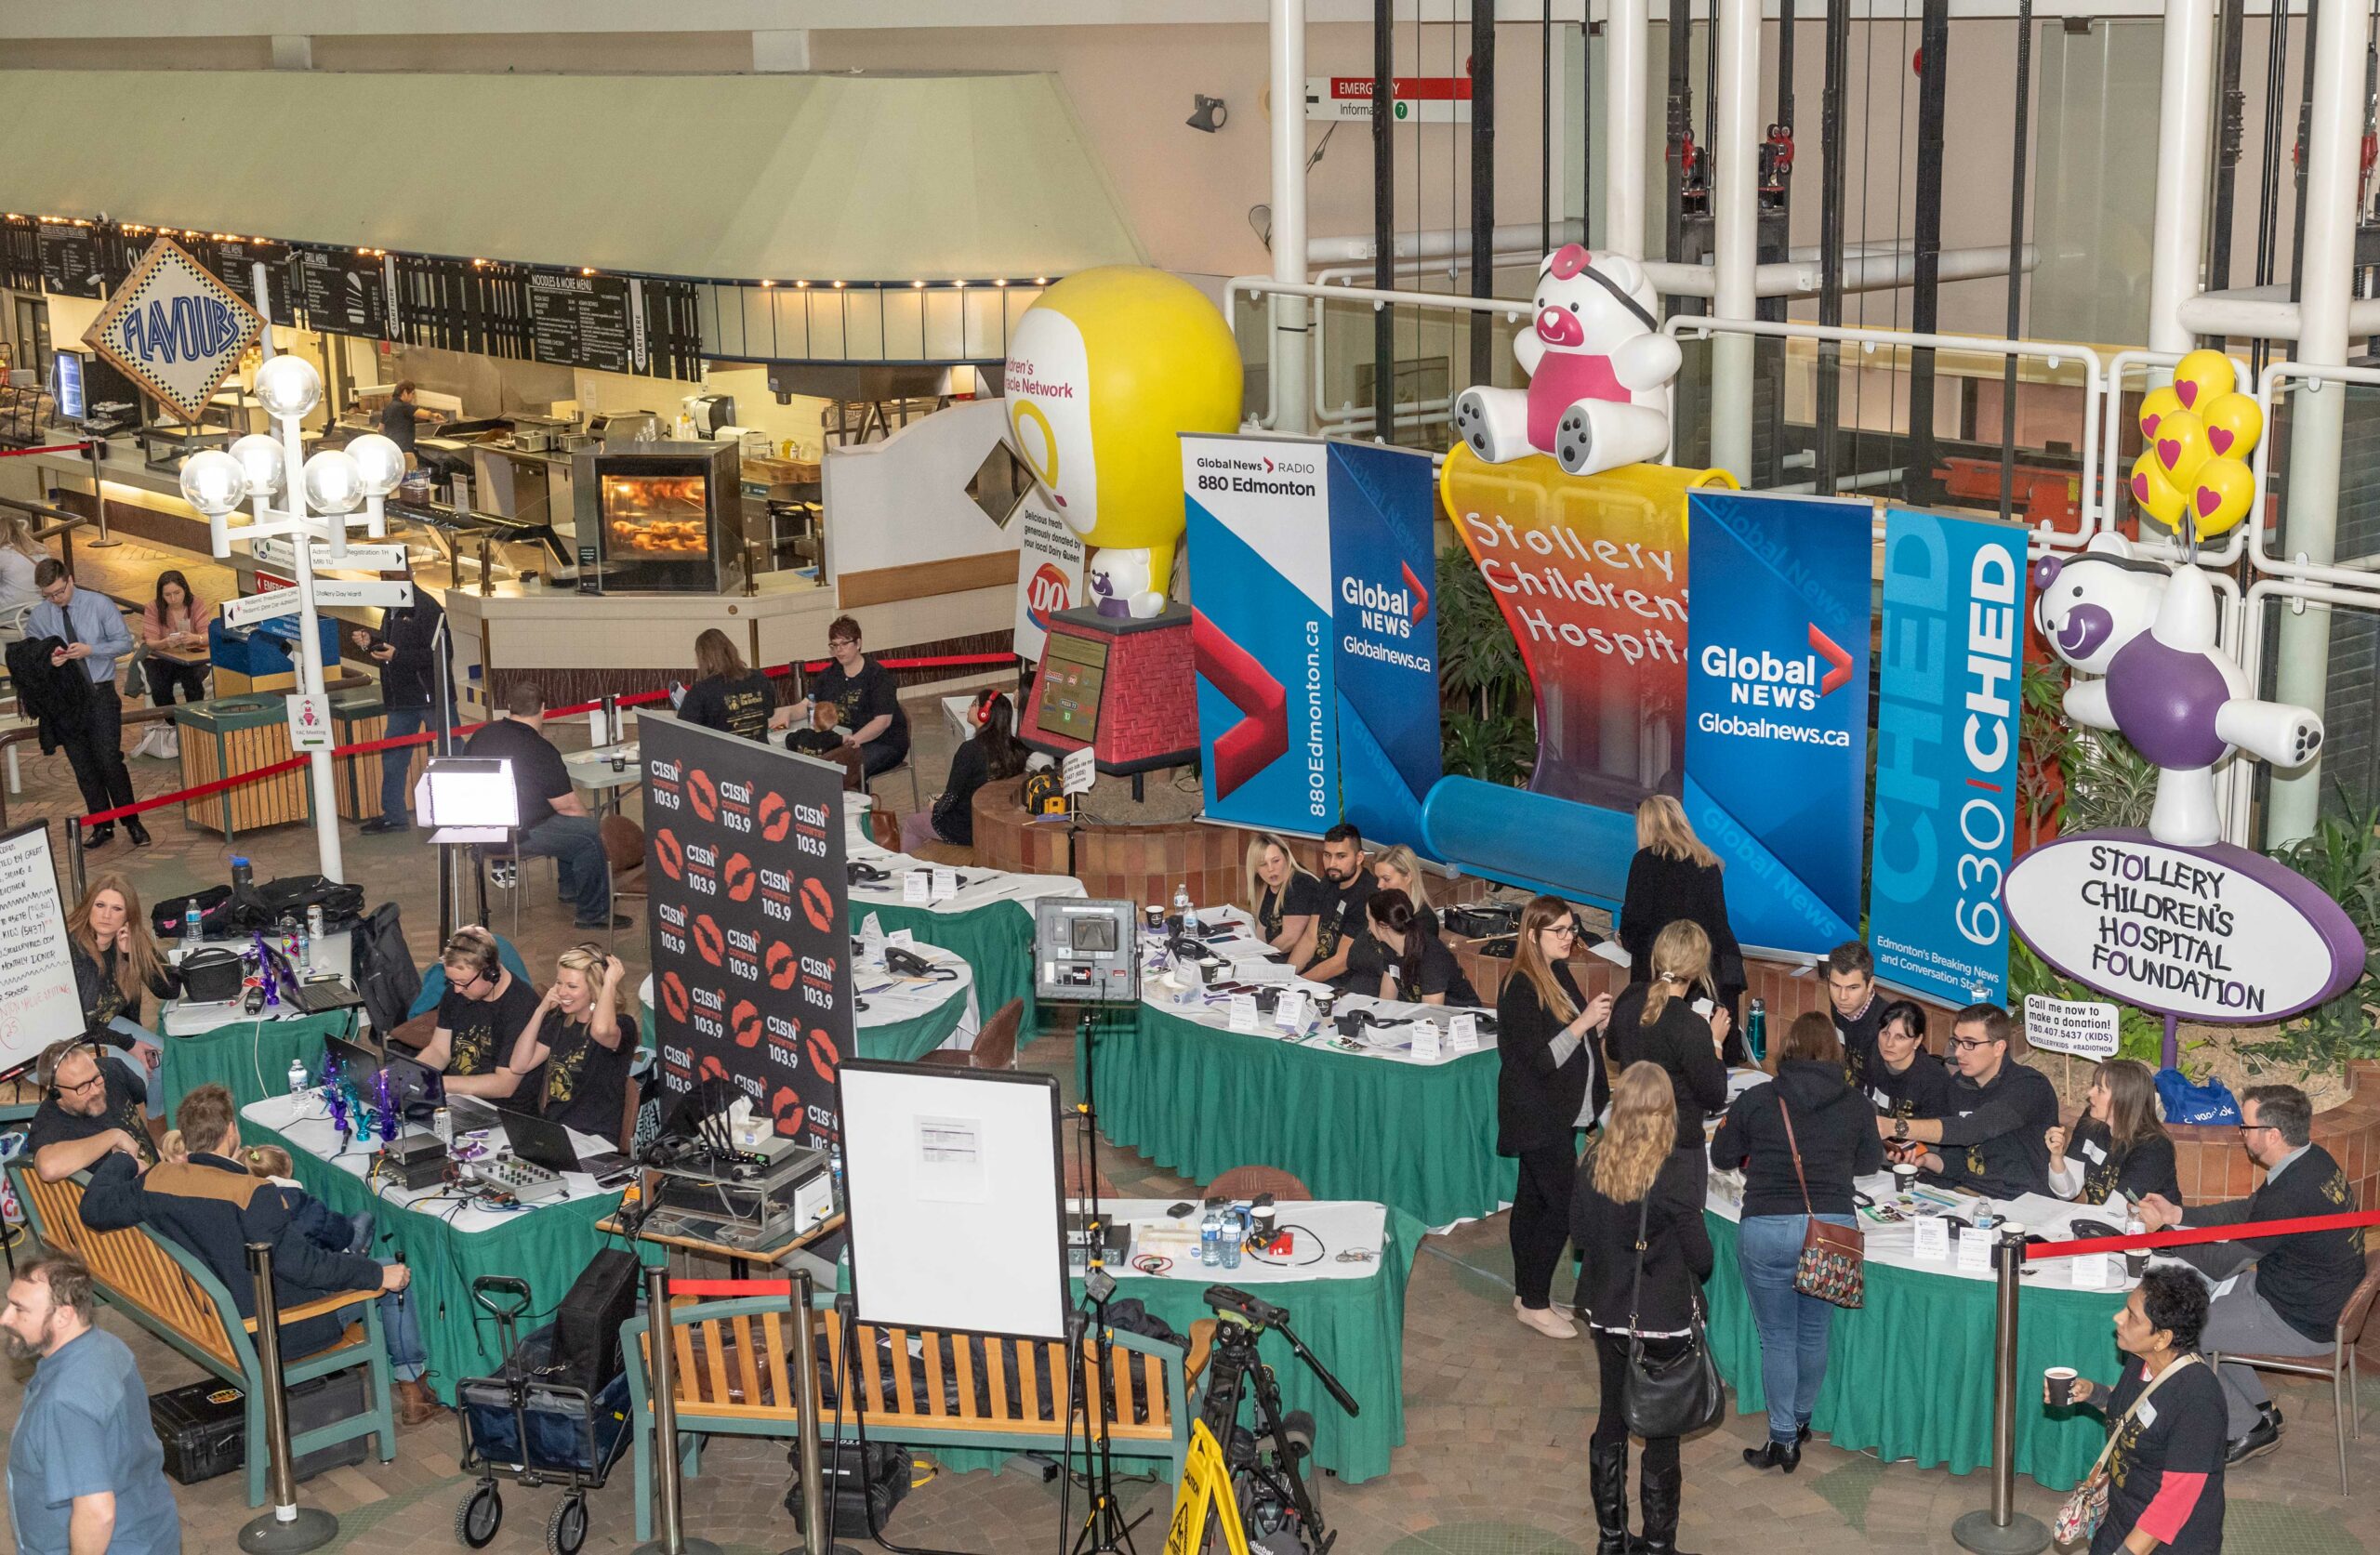 aerial photo of stollery radiothon event